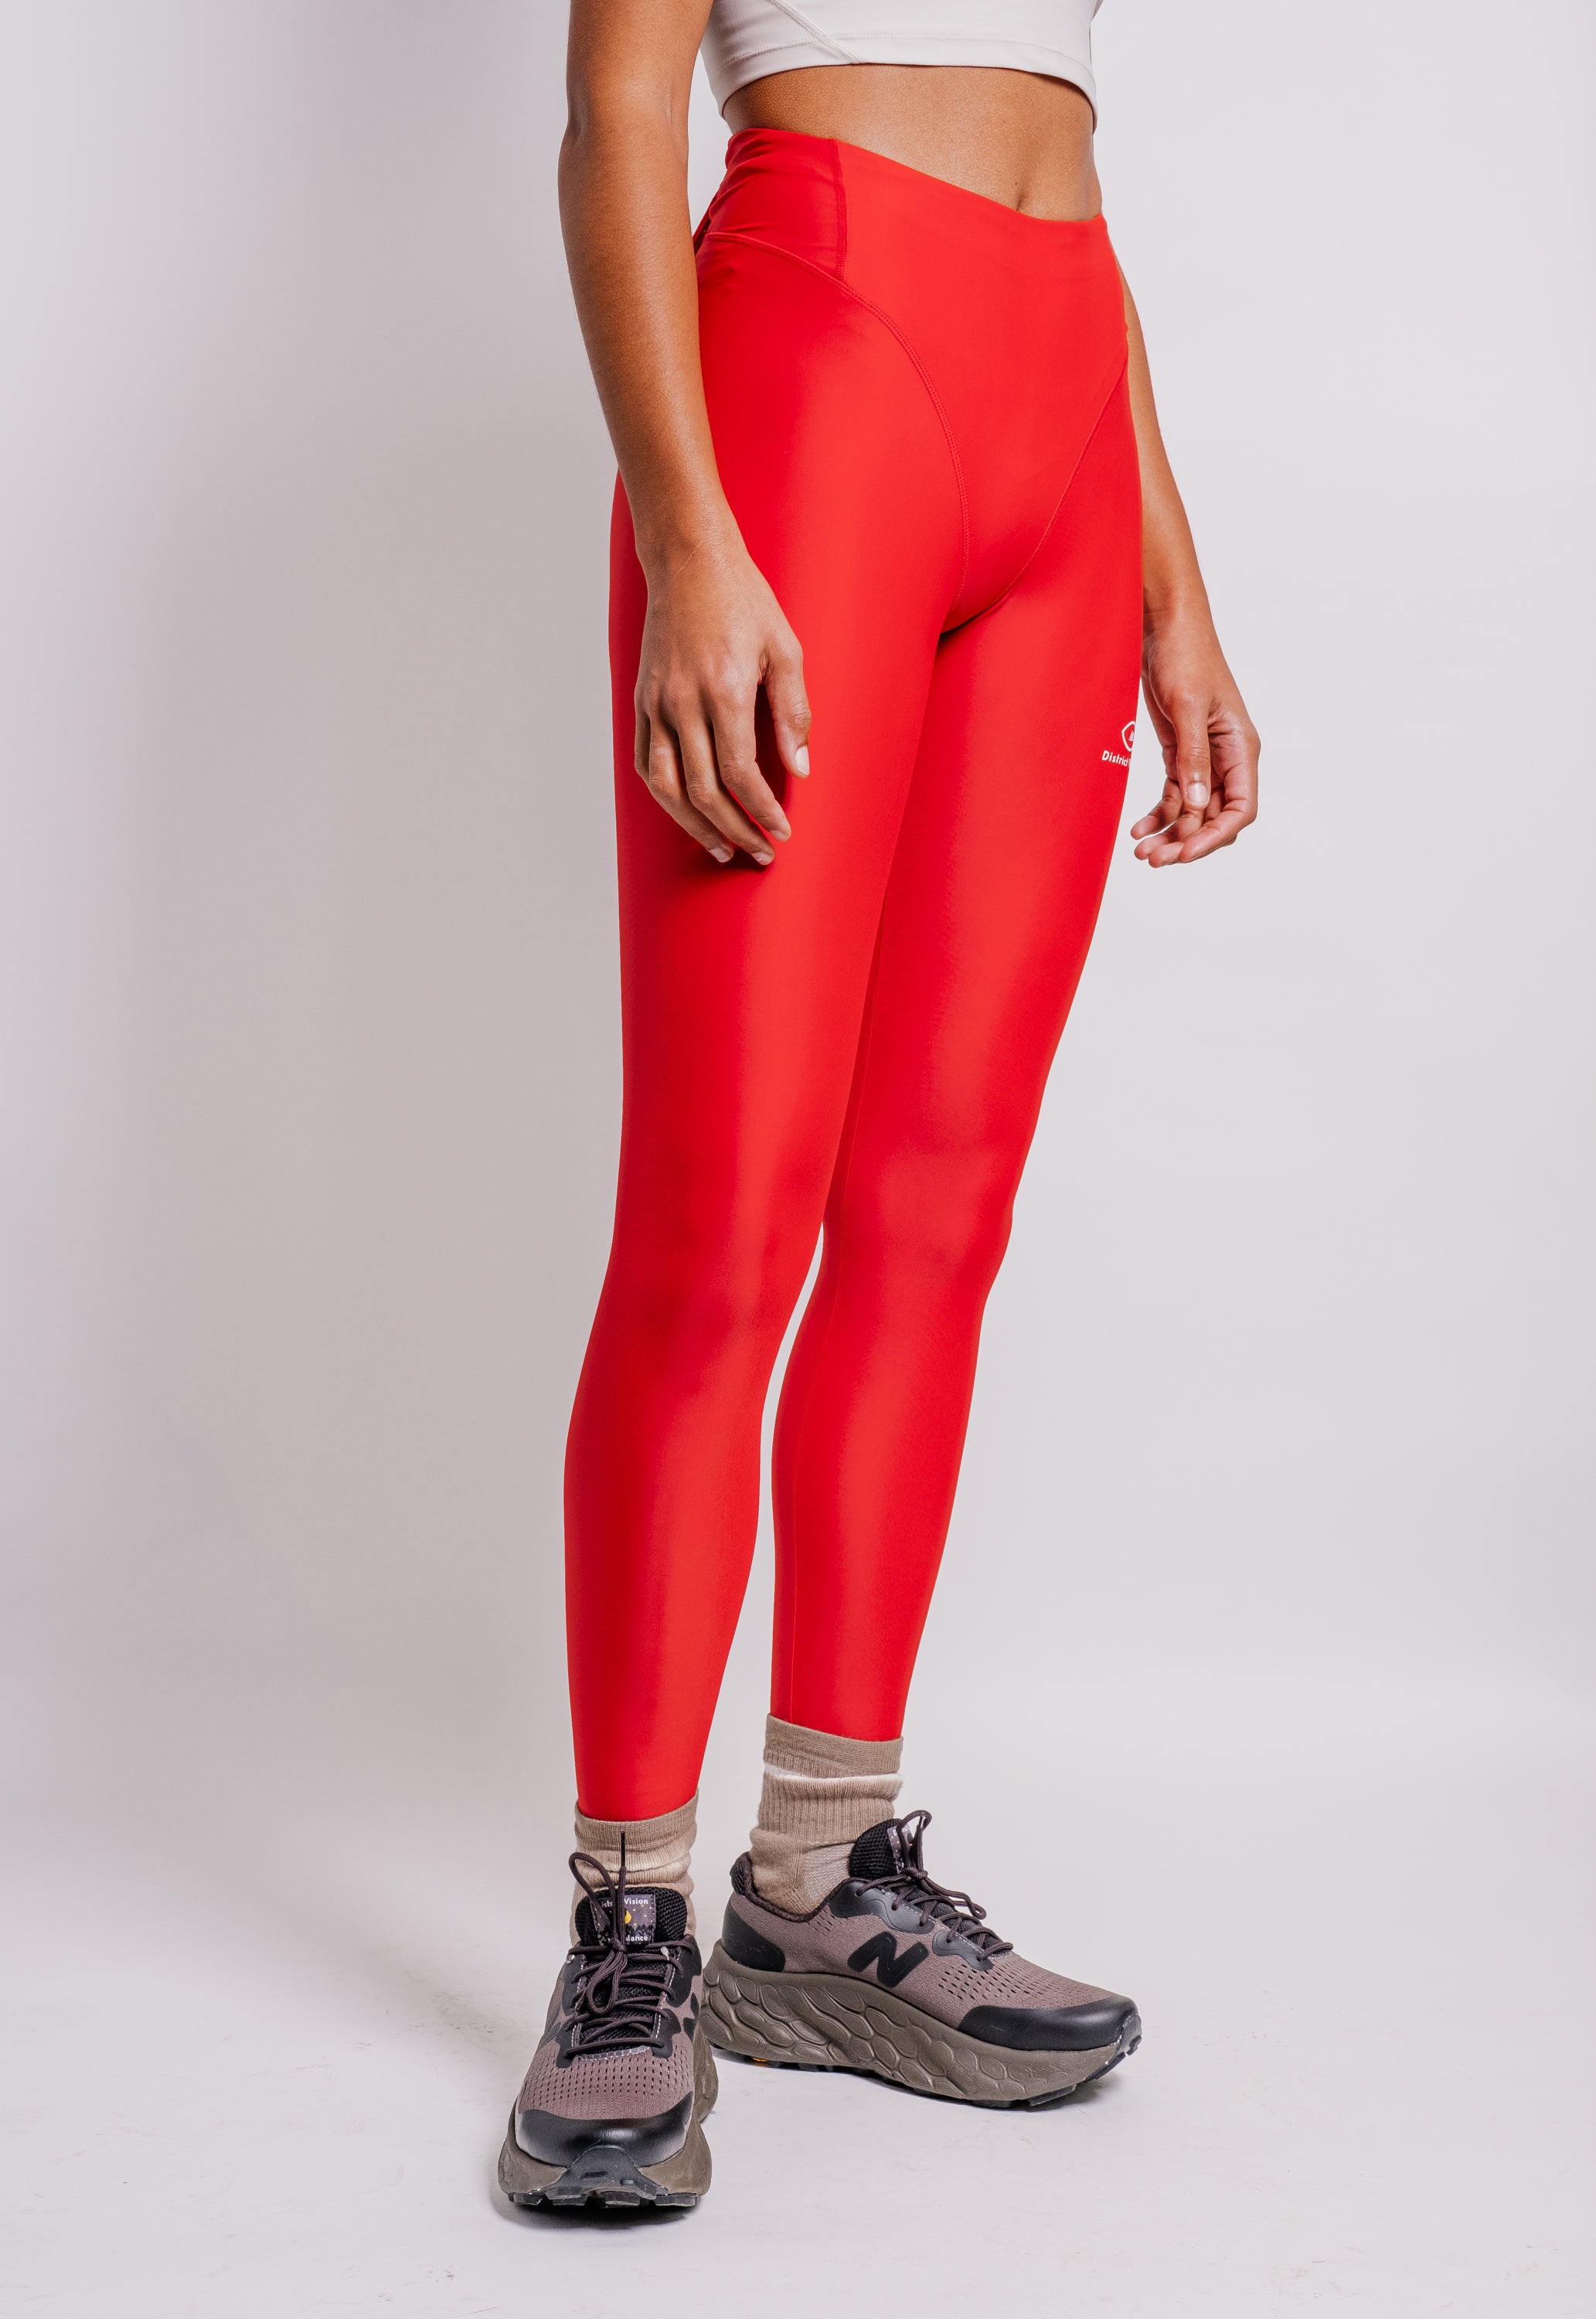 Red Feather Leggings - Kava Threads